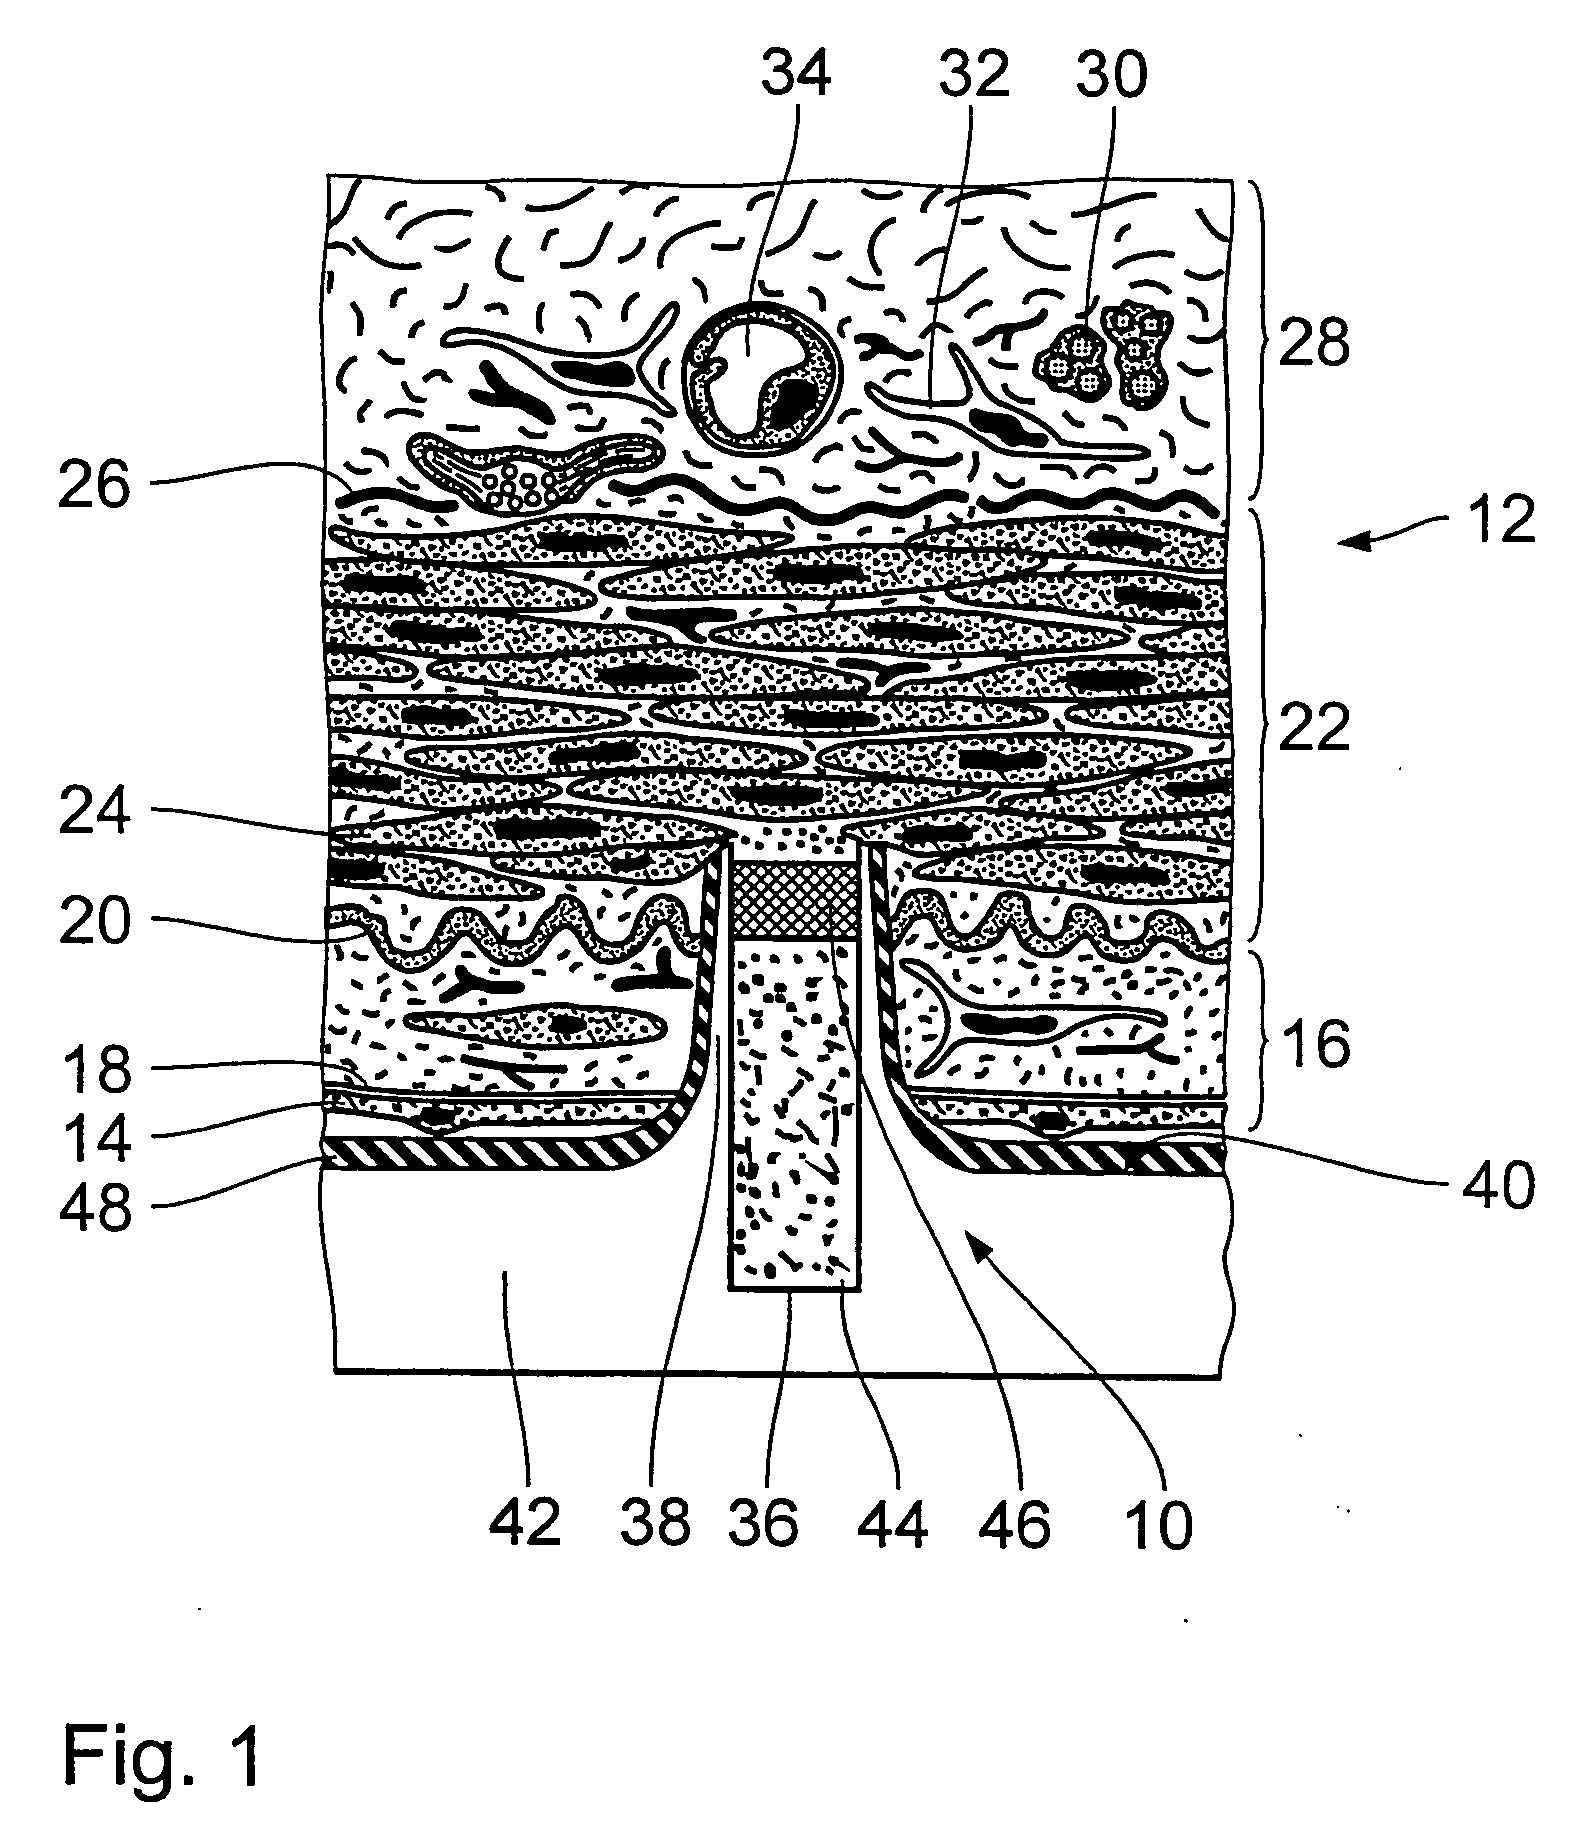 Endovascular implant for the injection of an active substance into the media of a blood vessel